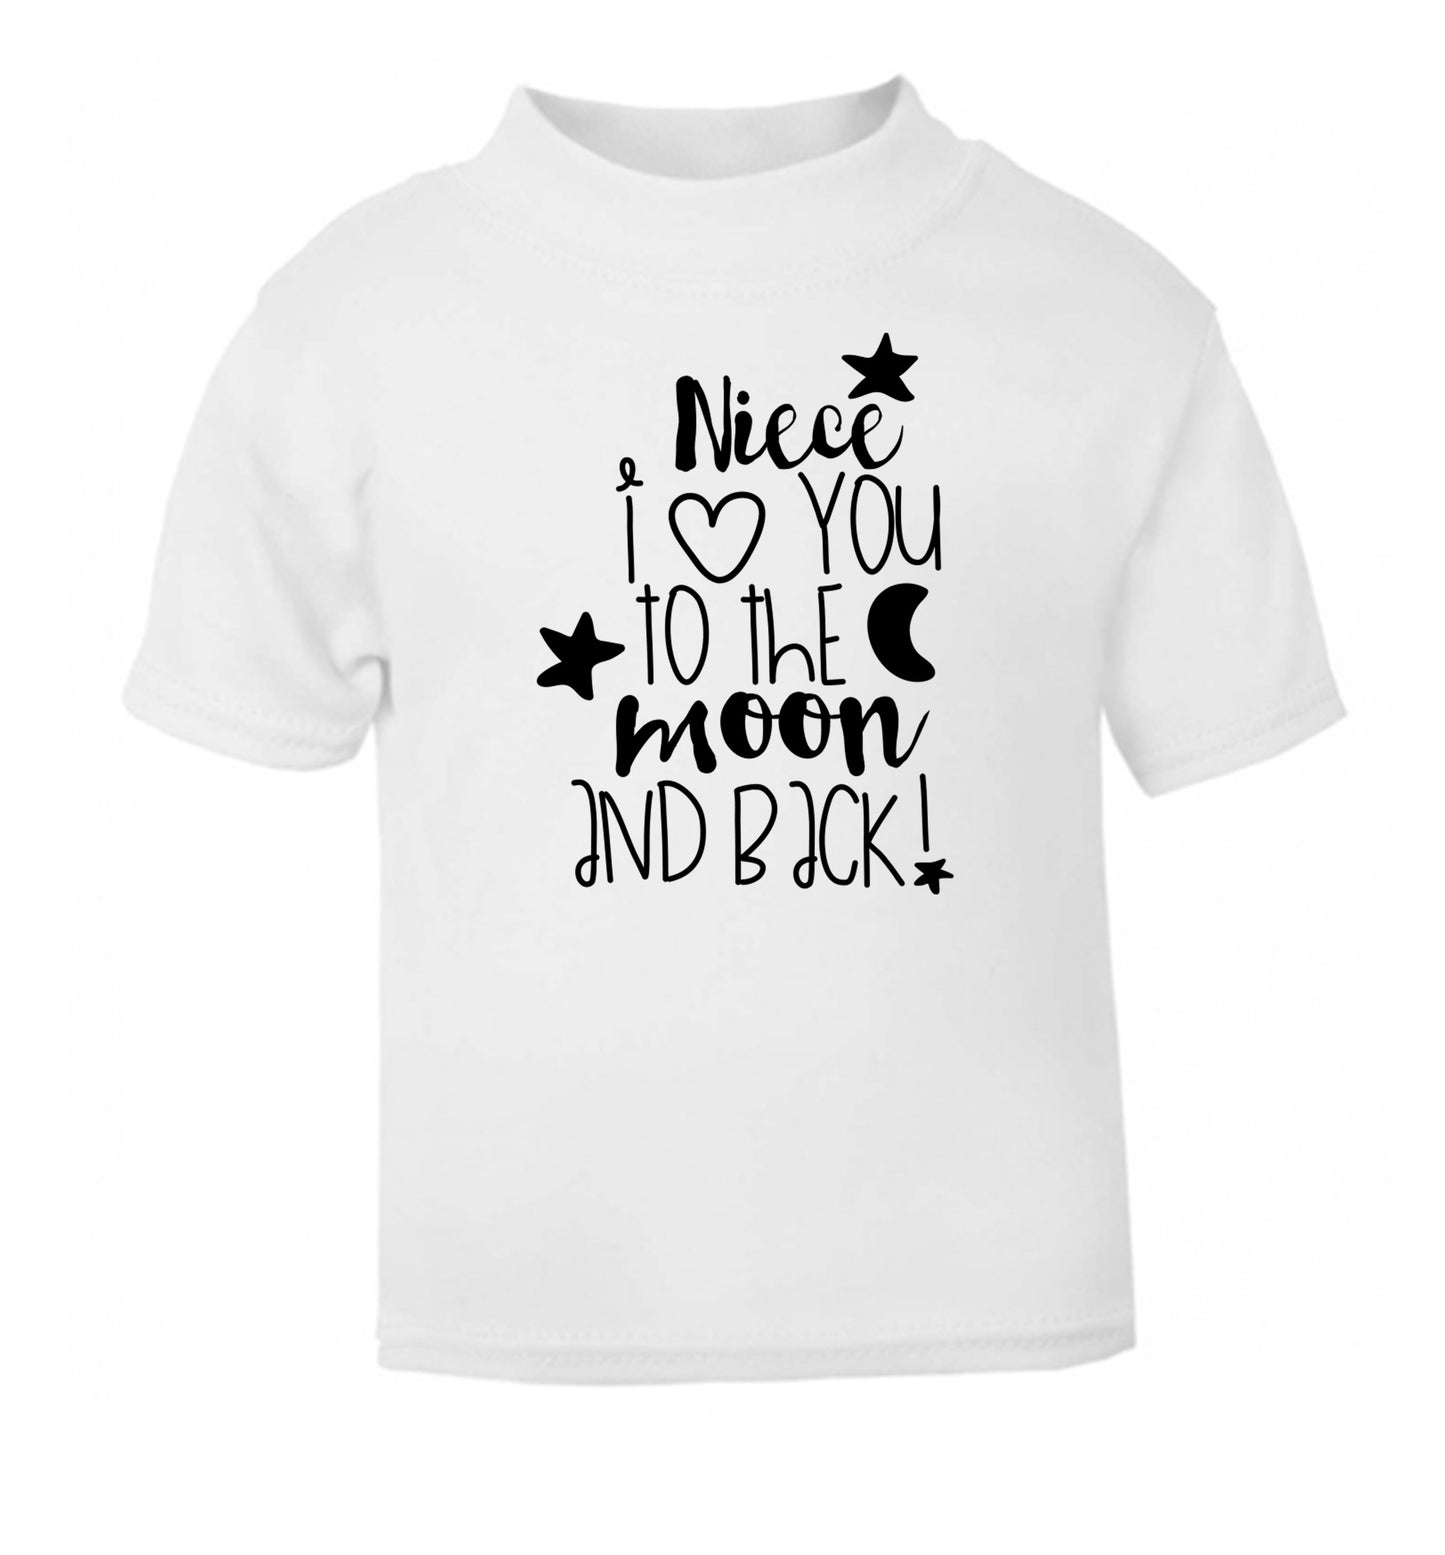 Niece I love you to the moon and back white Baby Toddler Tshirt 2 Years